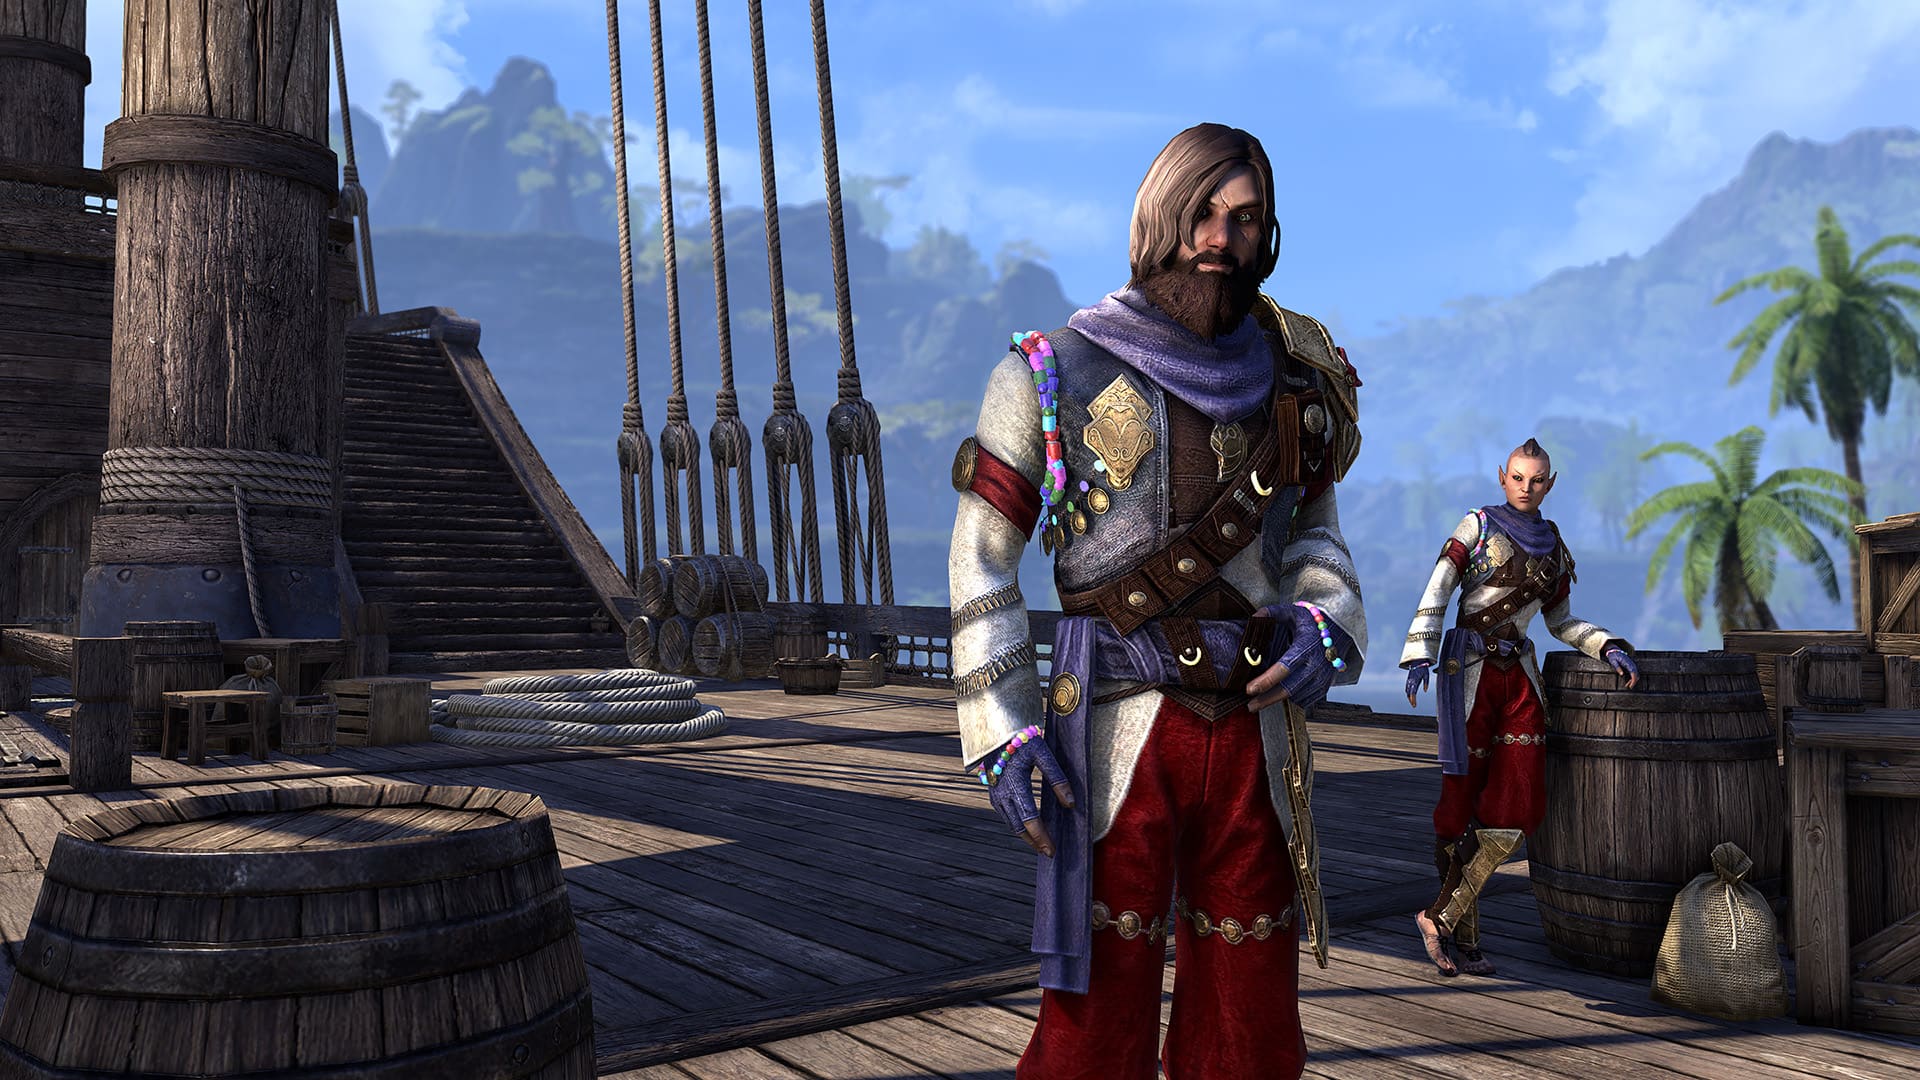 The Elder Scrolls Online: High Isle and the Legacy of the Bretons revealed  – PlayStation.Blog